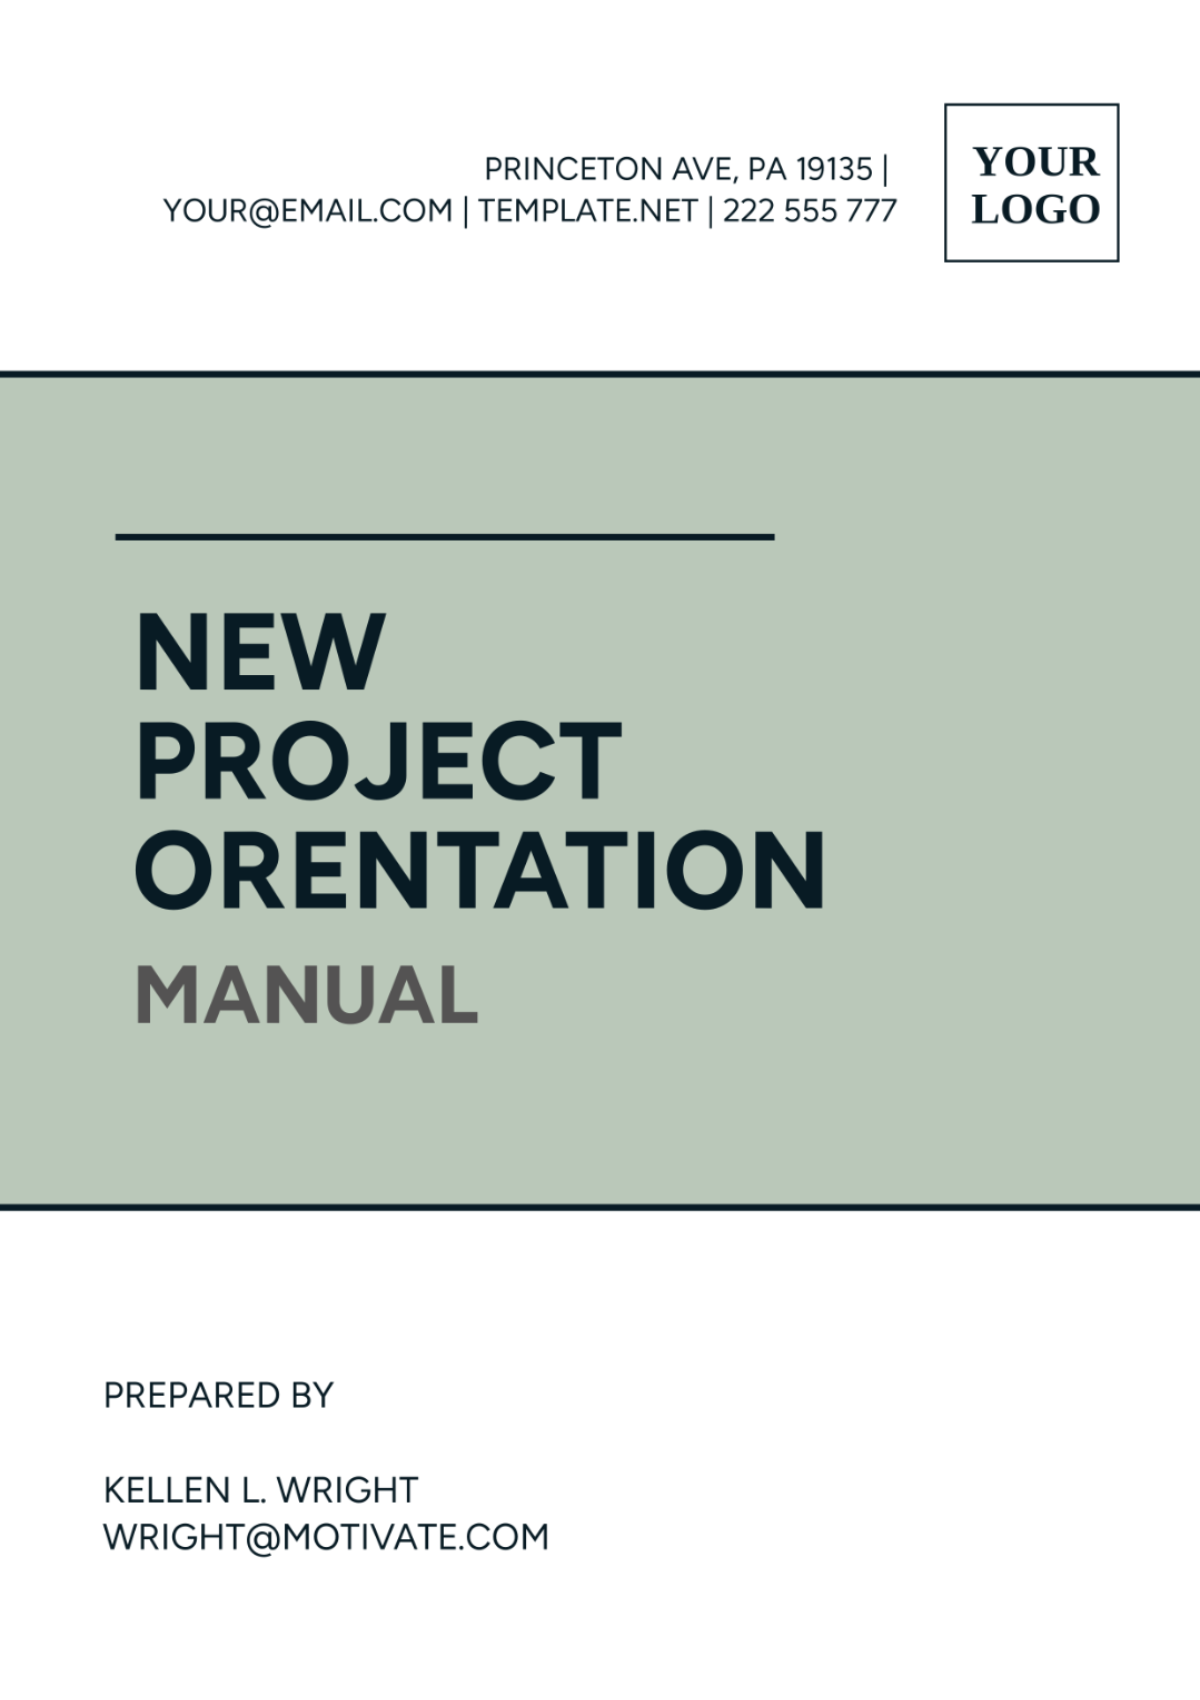 New Project Orentaiton Manual Template